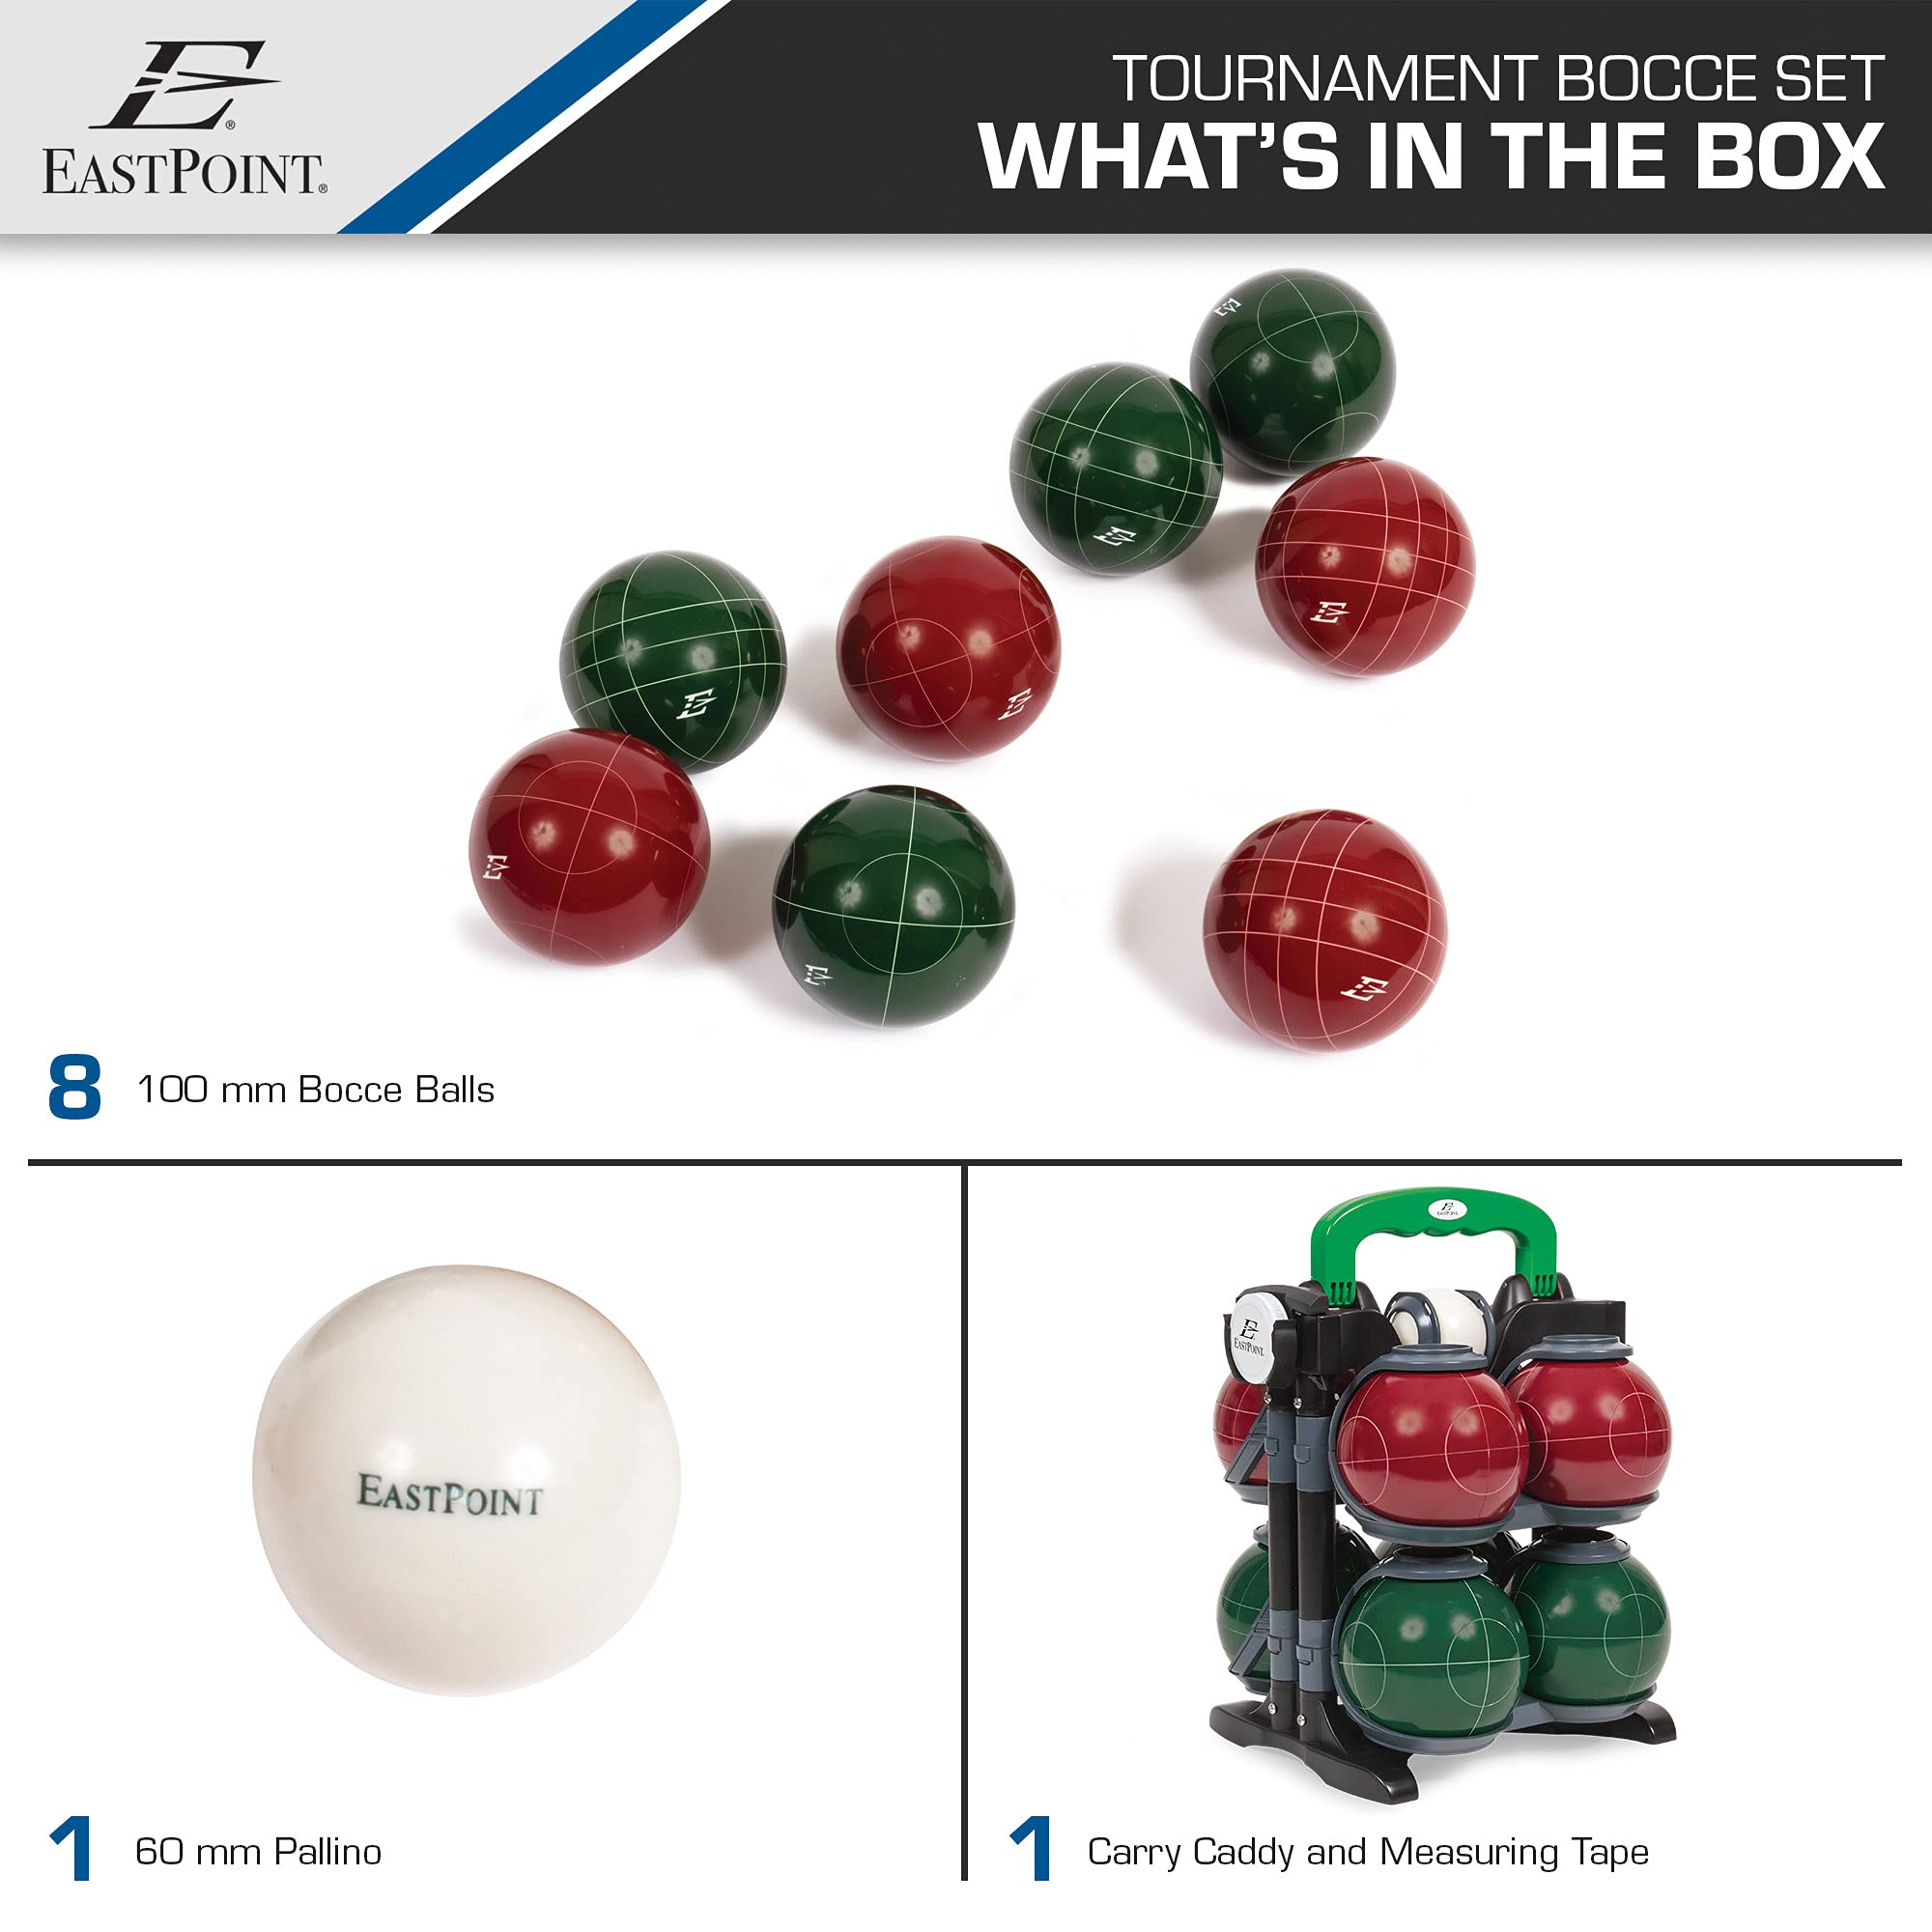 Eastpoint Sports Resin Bocce Ball Set- Features Deluxe Carry Case and All Accessories; Outdoor Fun for Kids, Teens and Adults